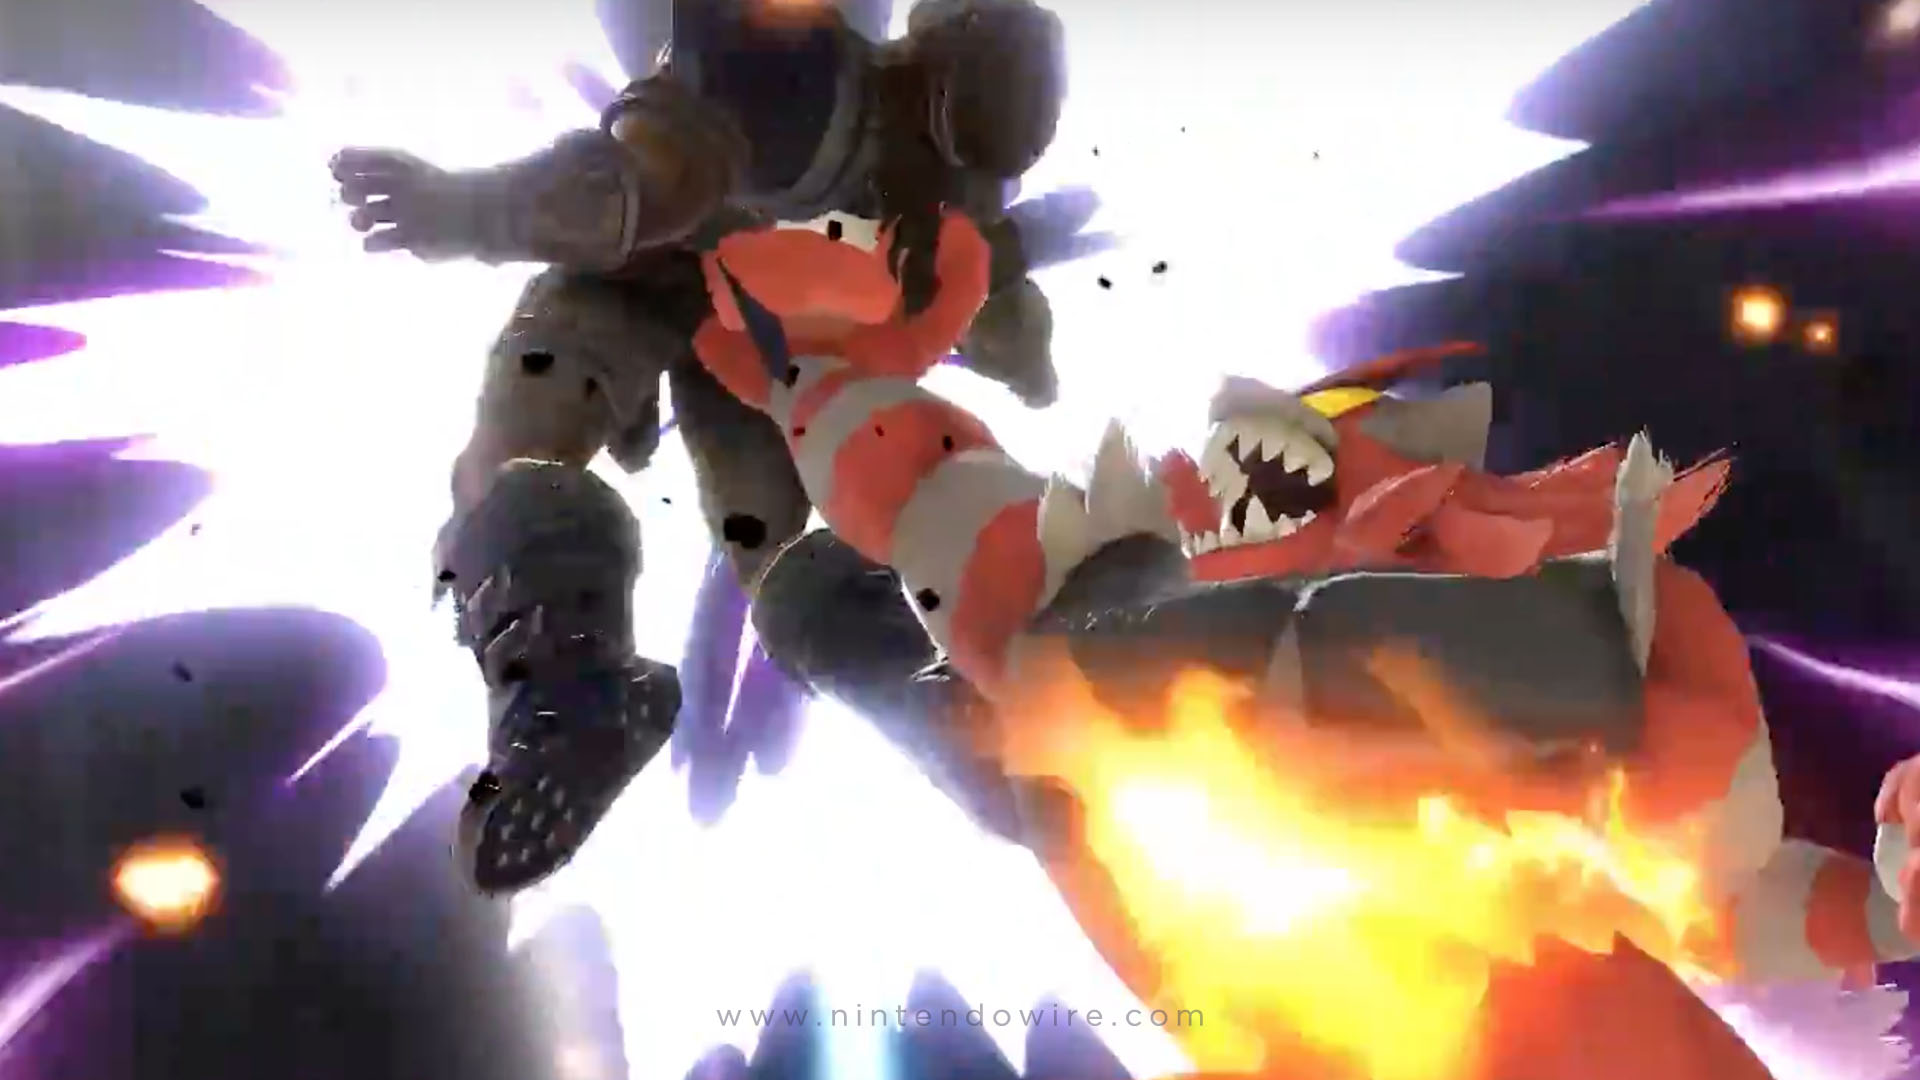 LONG LIVE THE KING — Incineroar used Fly! (seriously though, its